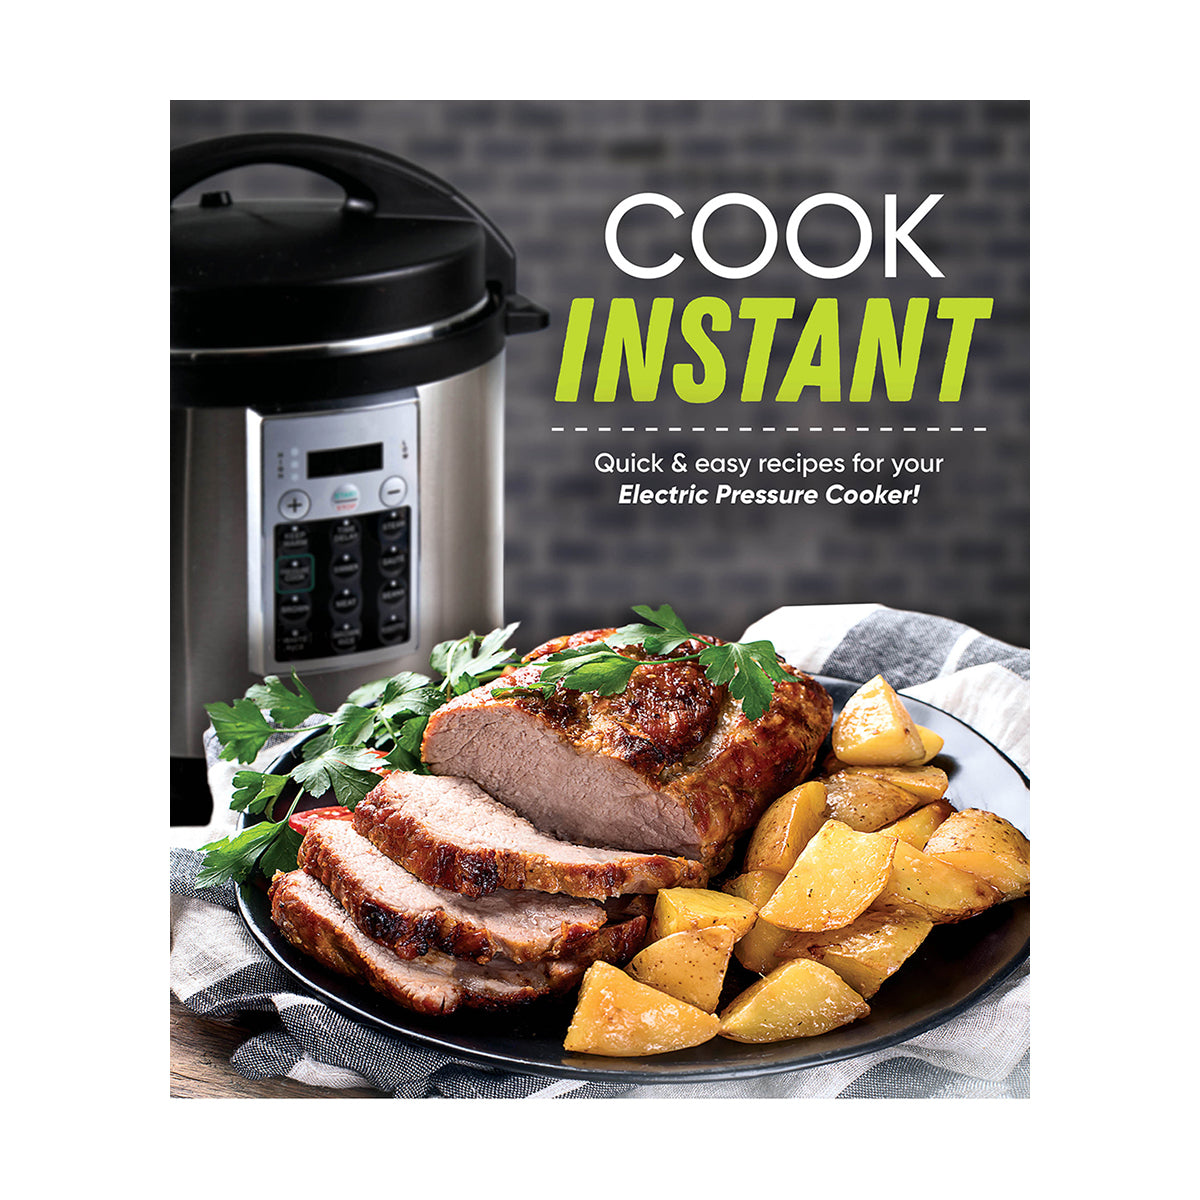 Cook Instant Quick & Easy Recipes for Your Electric Pressure Cooker!